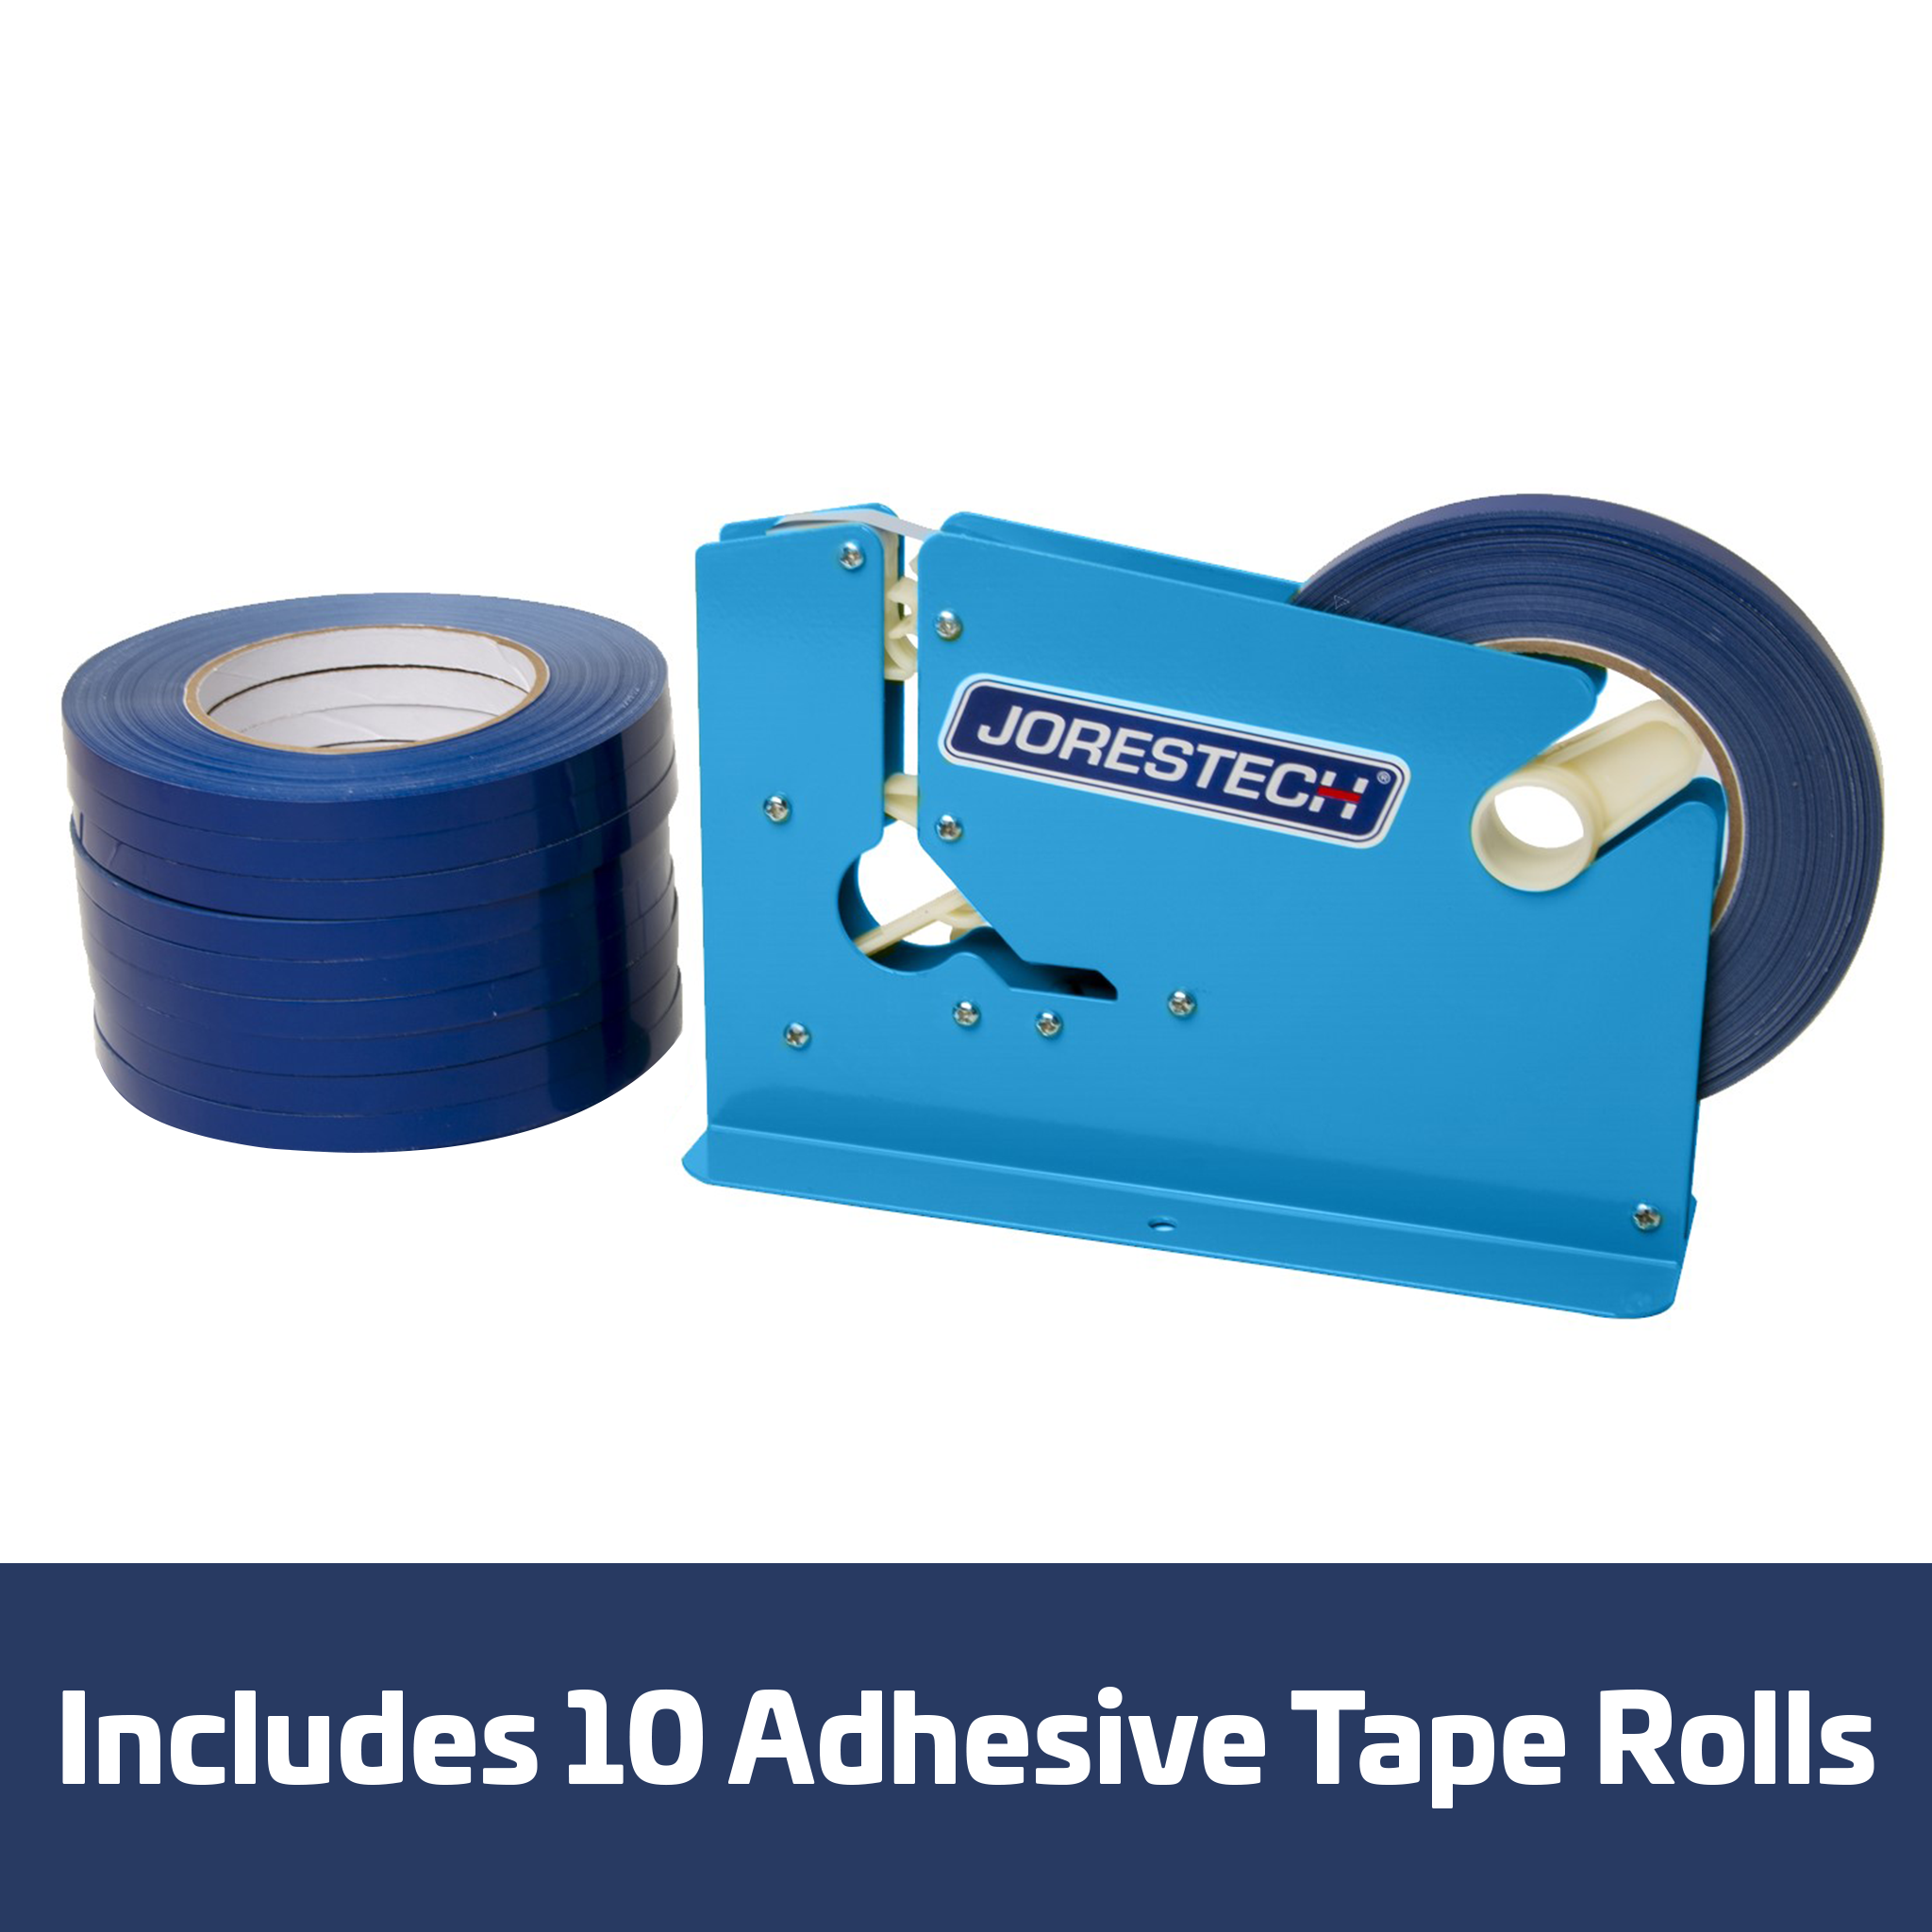 Textile Adhesive Tape “Power“ 50 m per Roll